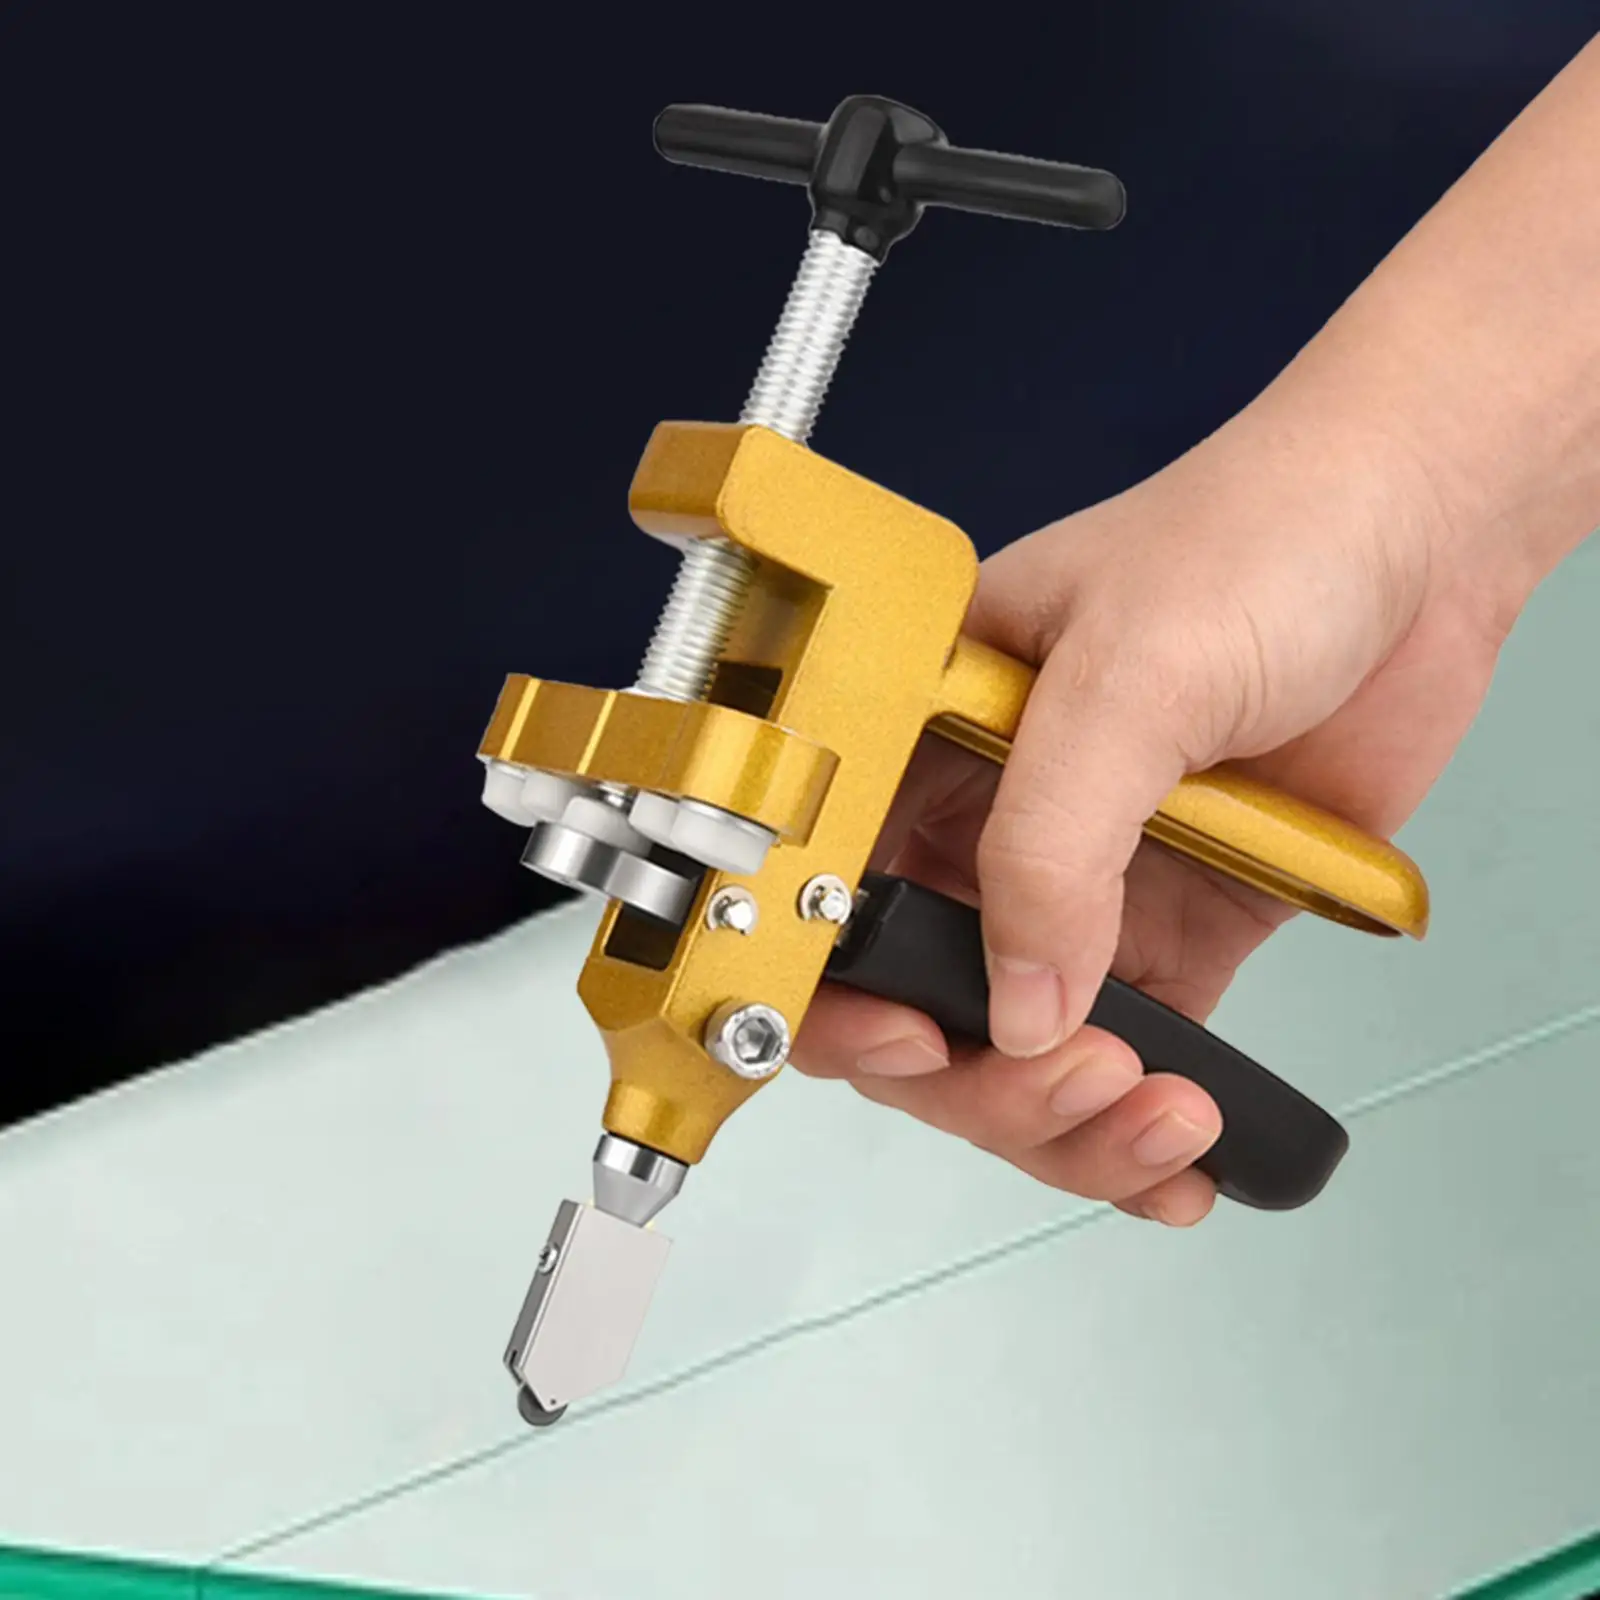 Manual Tile Cutter Tool Handheld Glazed Tiles Multifunctional 3 in 1 Glass Breaking Durable Portable Glass Cutter Hand Tool